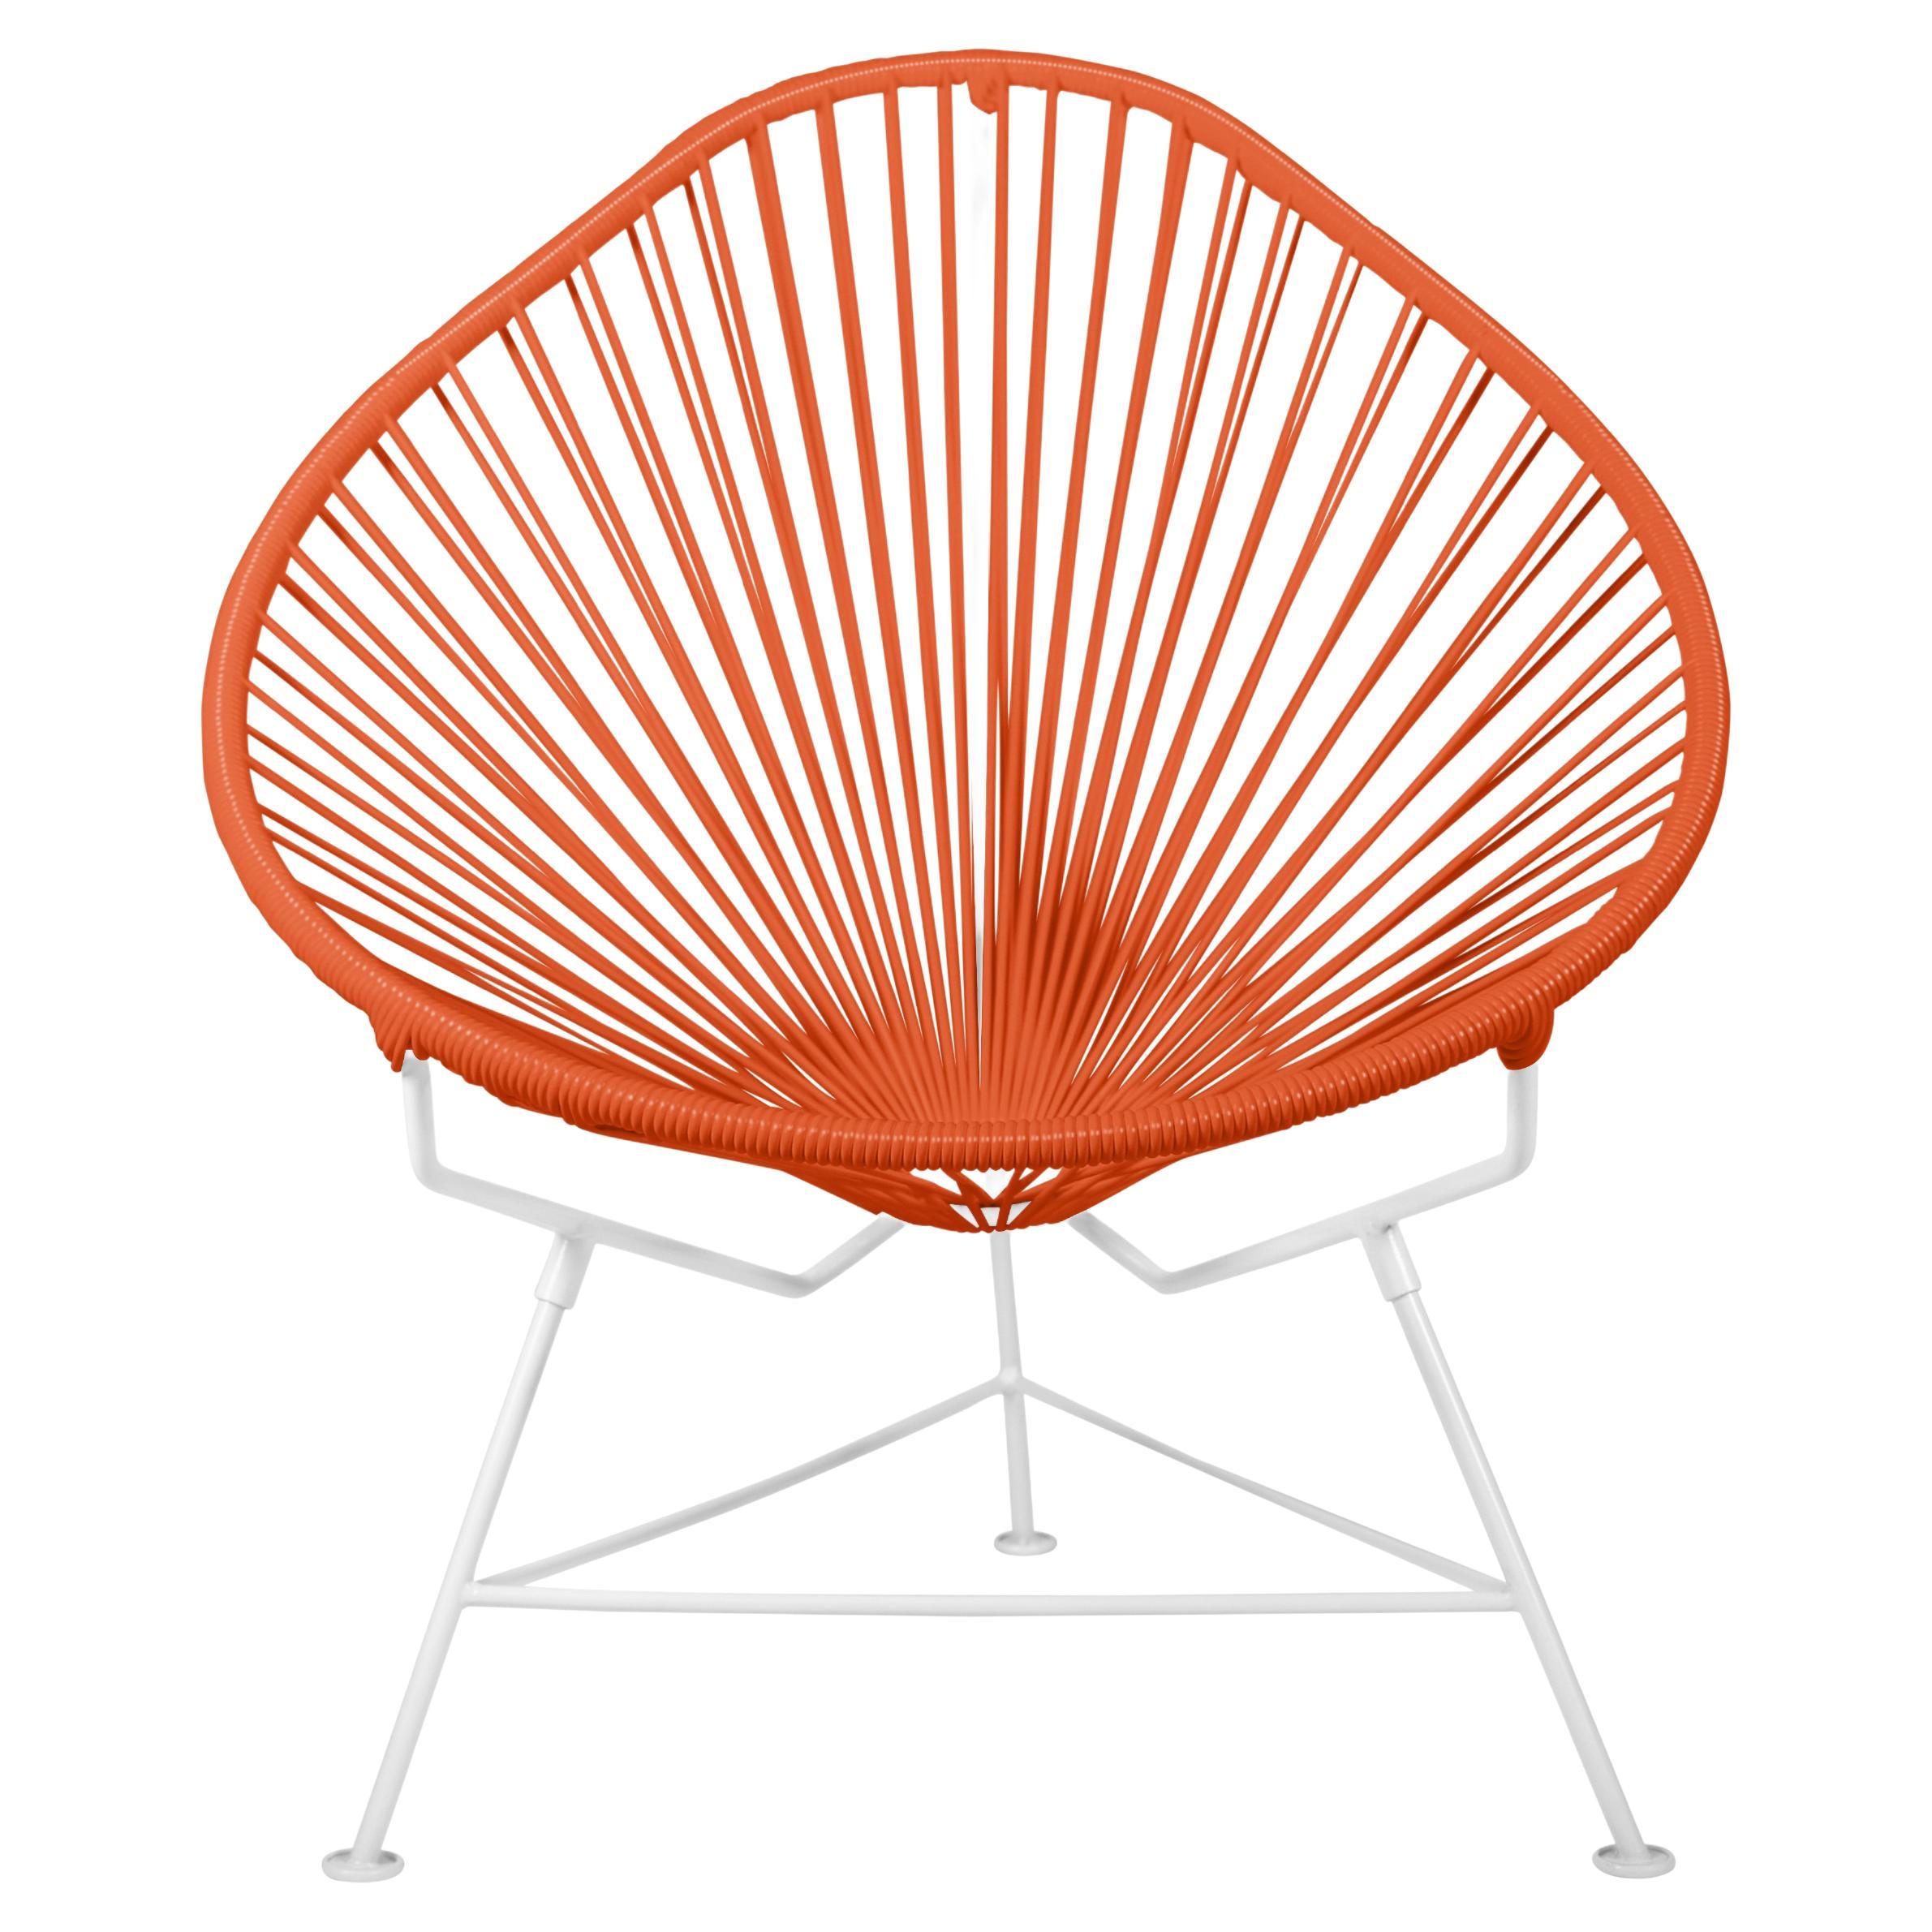 Innit Designs Acapulco Chair Orange Weave on White Frame